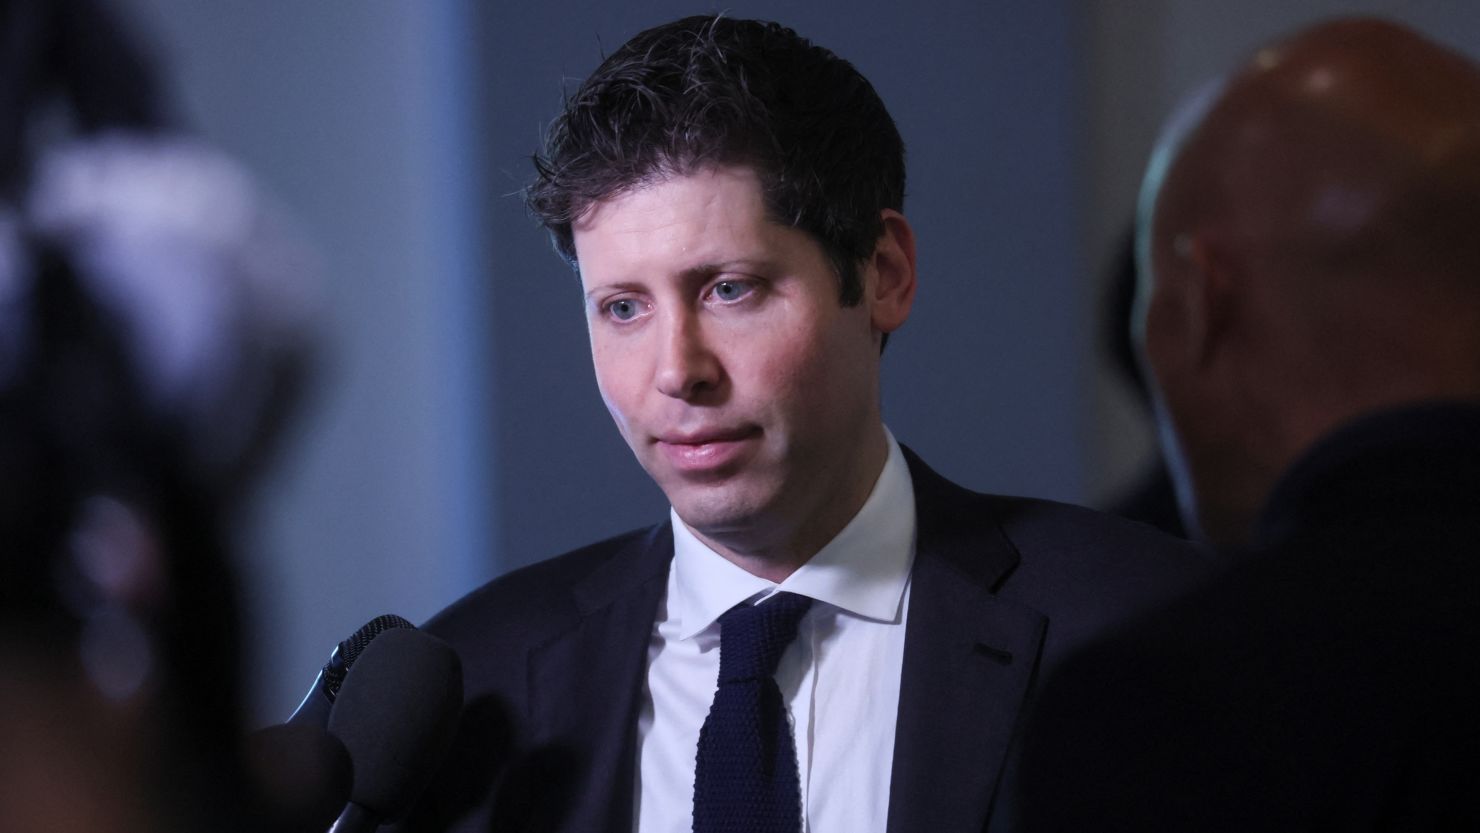 Sam Altman, CEO of ChatGPT maker OpenAI, arrives for a bipartisan Artificial Intelligence (AI) Insight Forum for all U.S. senators hosted by Senate Majority Leader Chuck Schumer (D-NY) at the U.S. Capitol in Washington, U.S., September 13, 2023. REUTERS/Leah Millis